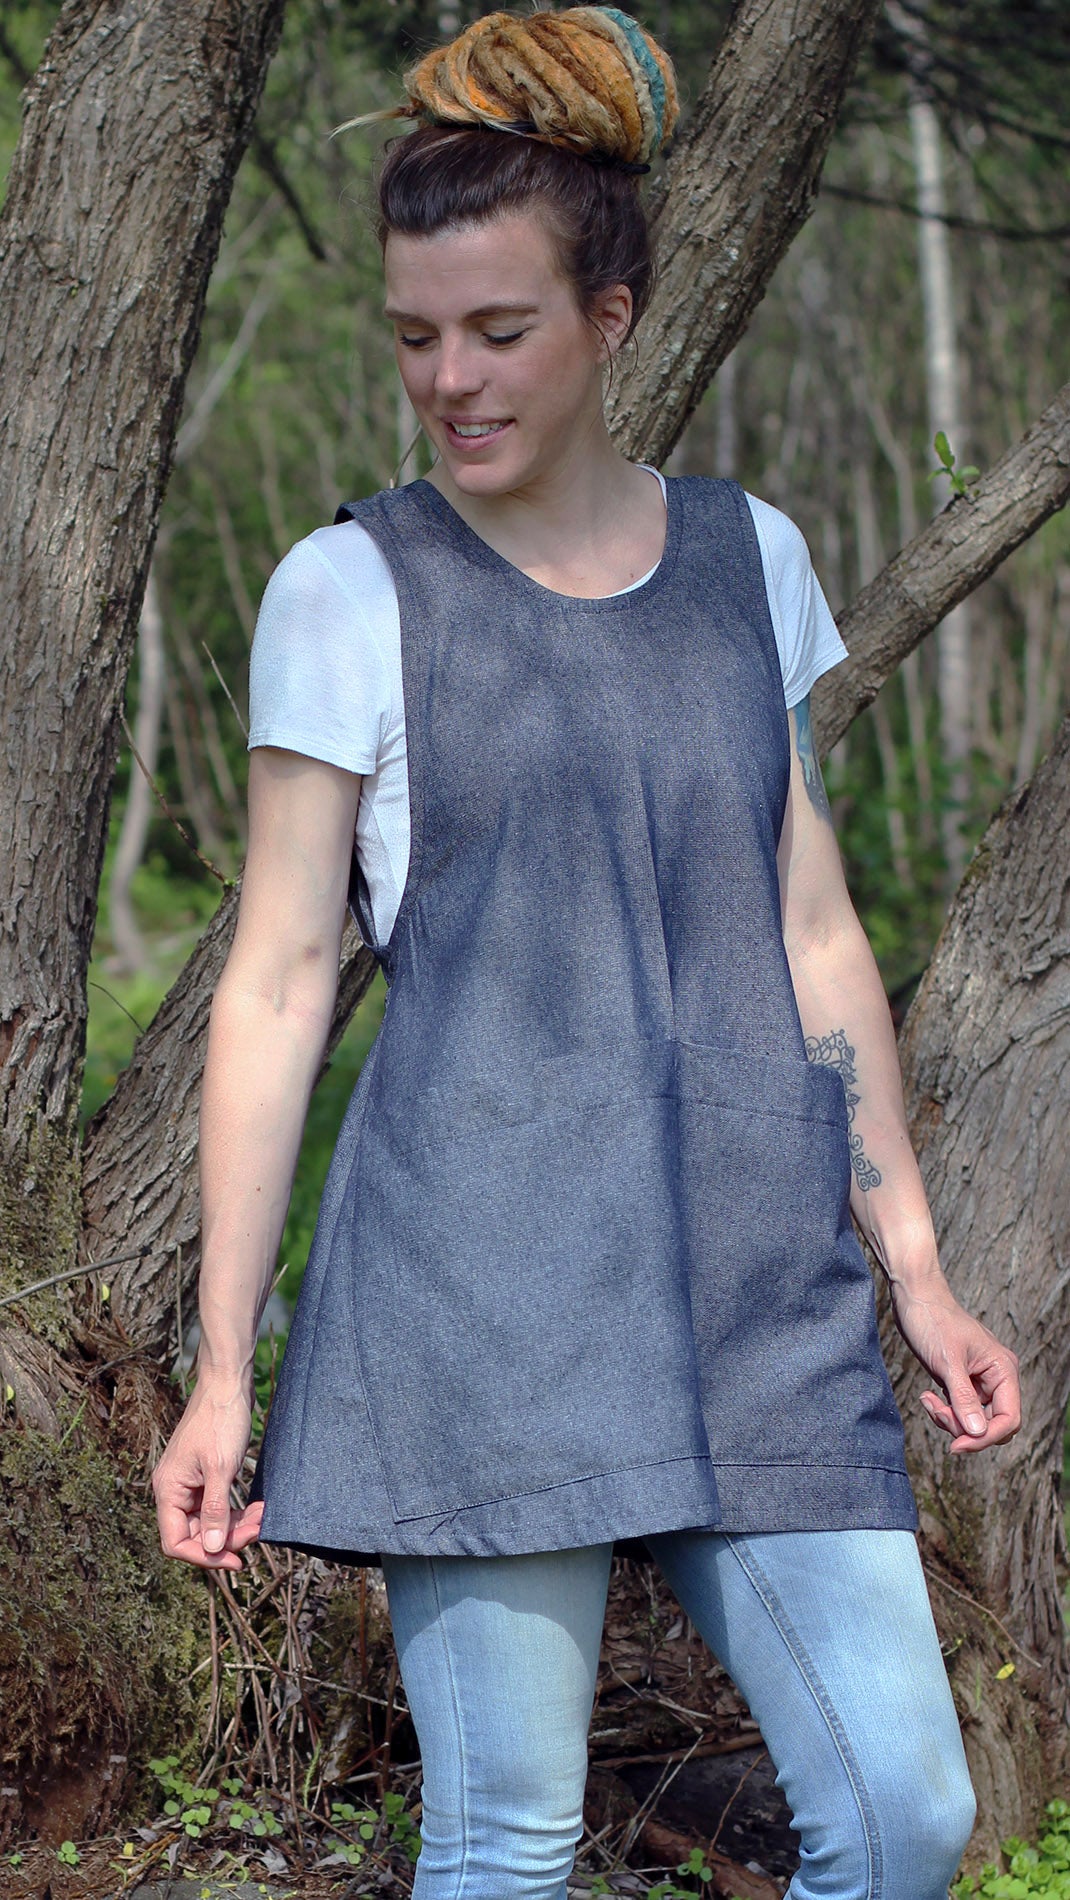 XS-5X Smock #2 in Denim - Front View of Smock #2